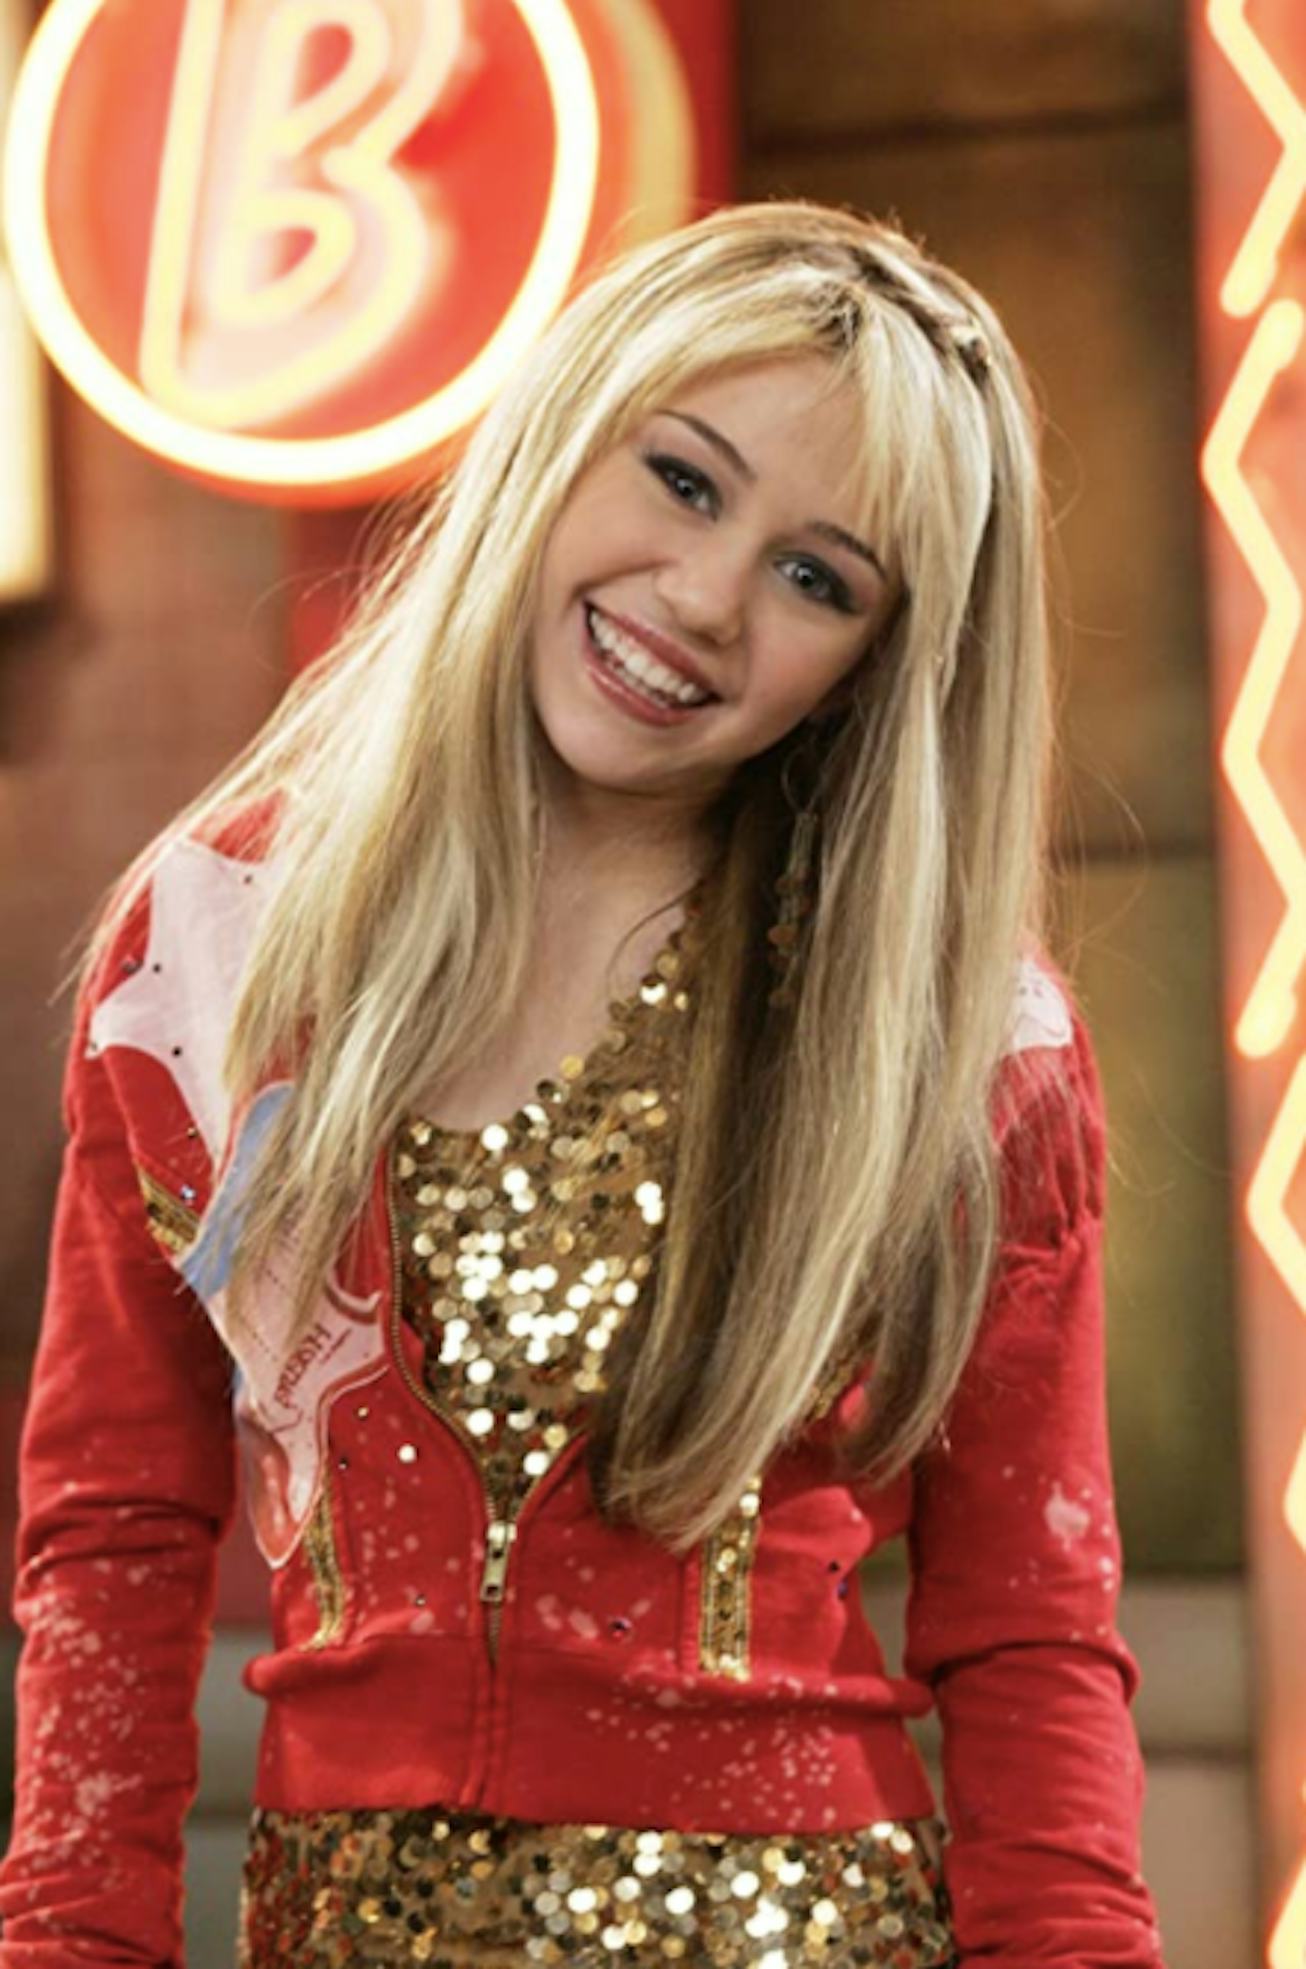 Miley Cyrus wrote a letter to her former alter ego, Hannah Montana, on Instagram.